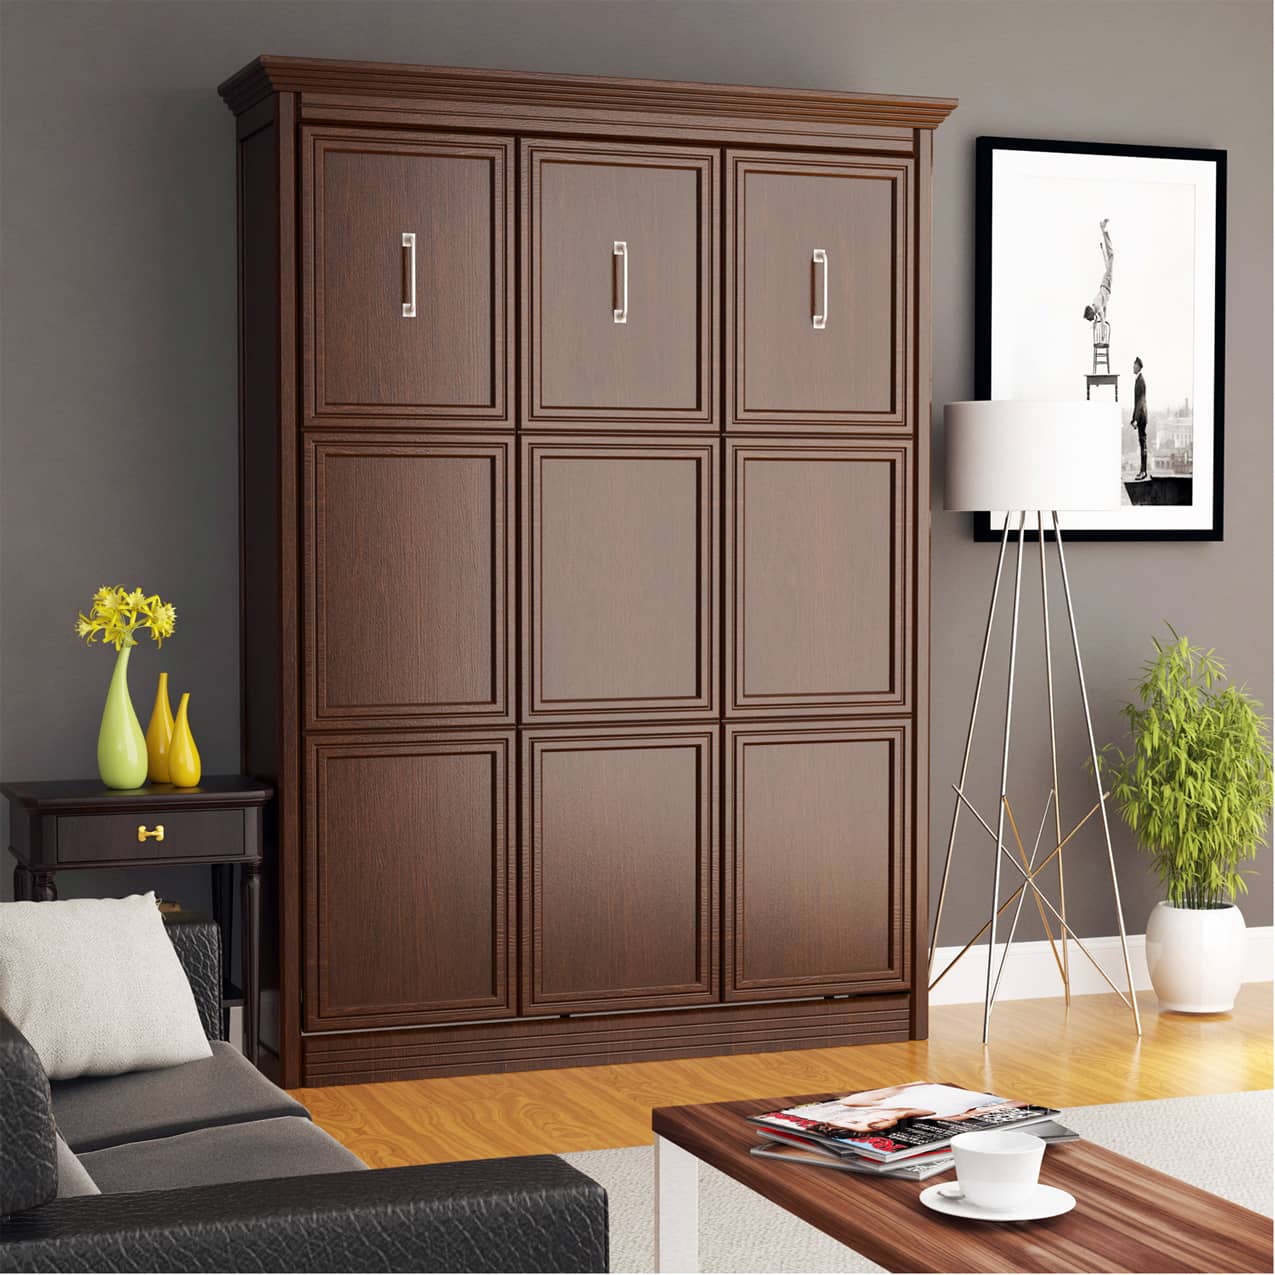 Chamberlin queen portrait murphy bed cabinet closed hidden hideaway hide away hide-a-way diy murphy bed kit fold out pull down wall bed cabinet guest bed